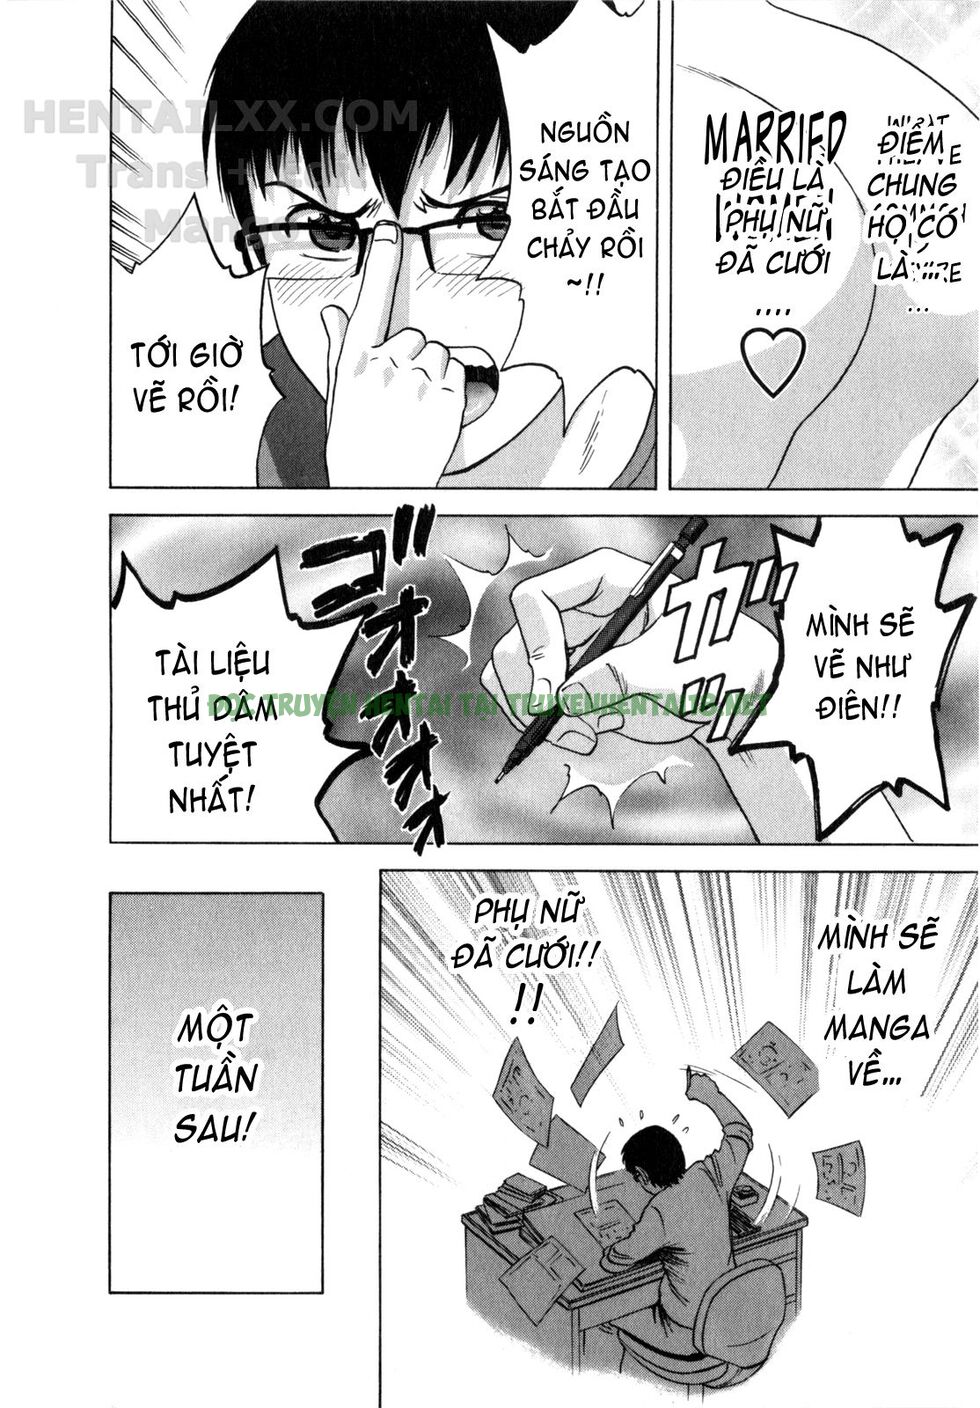 Xem ảnh Life With Married Women Just Like A Manga - Chapter 4 - 8 - Hentai24h.Tv